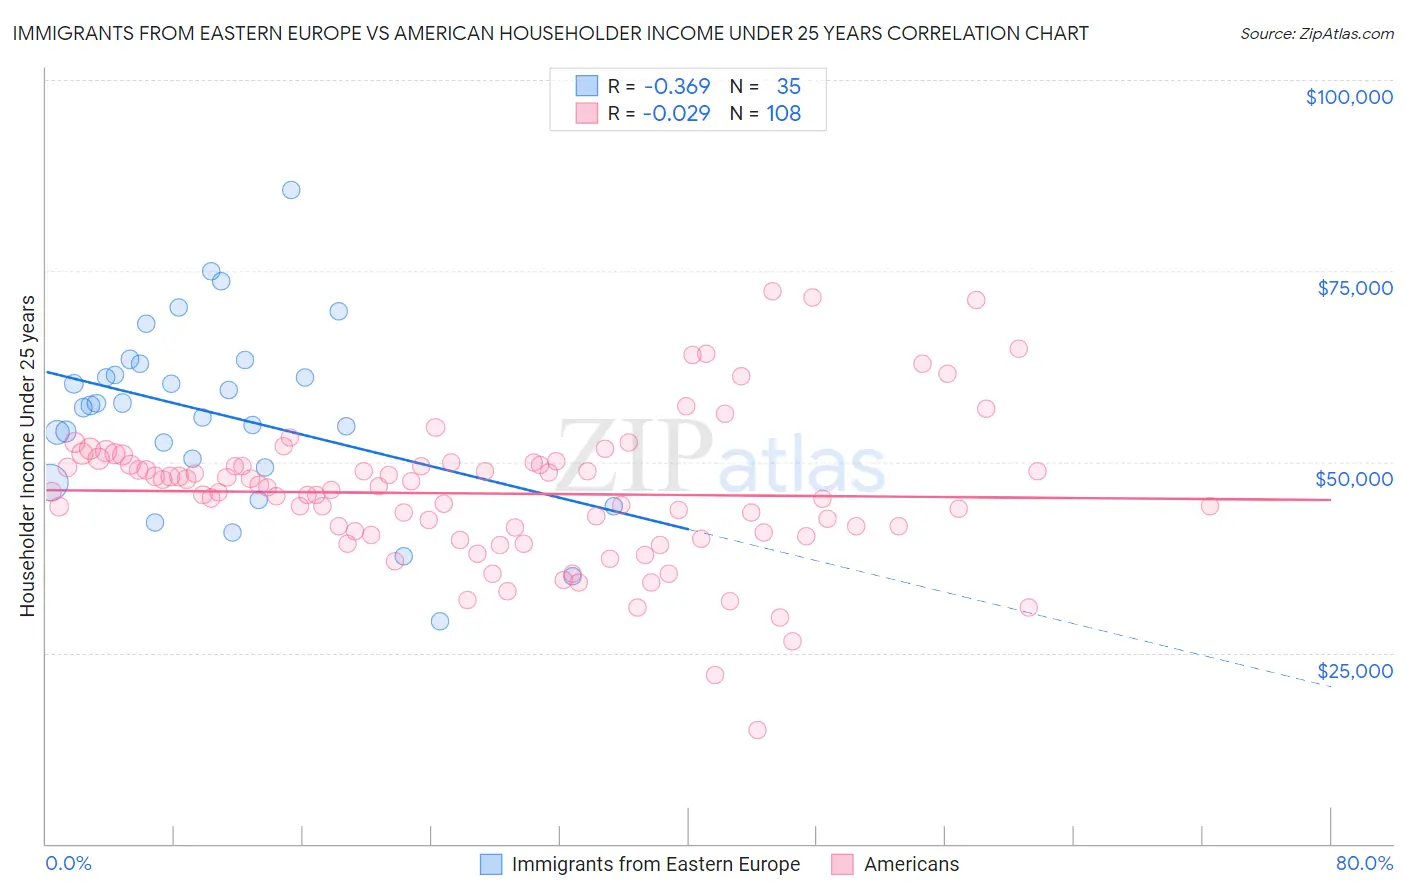 Immigrants from Eastern Europe vs American Householder Income Under 25 years